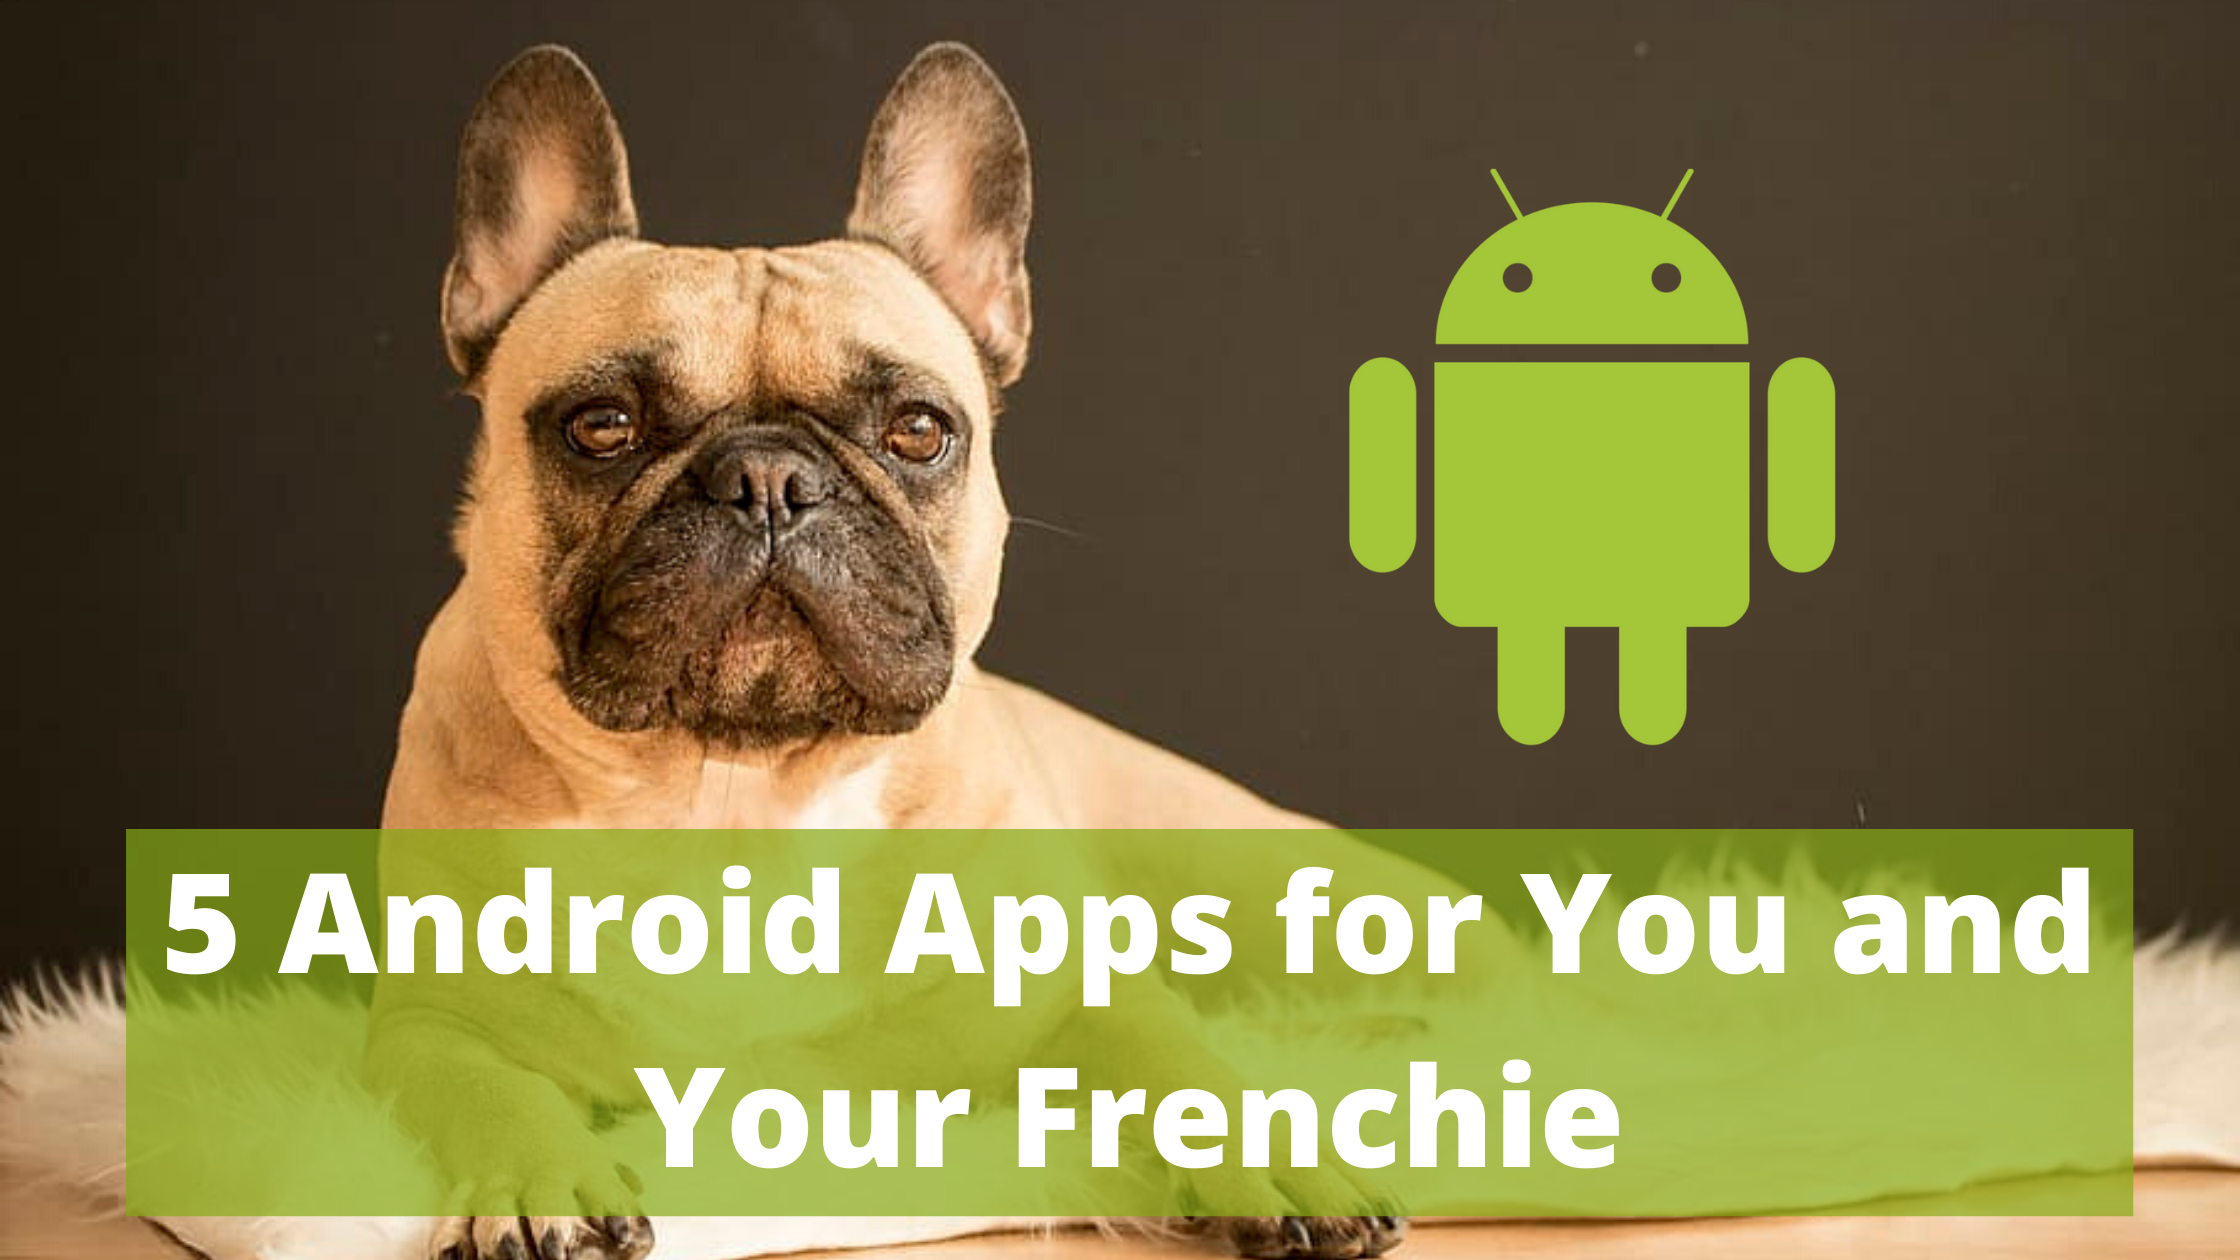 5 Android Apps for You and Your Frenchie